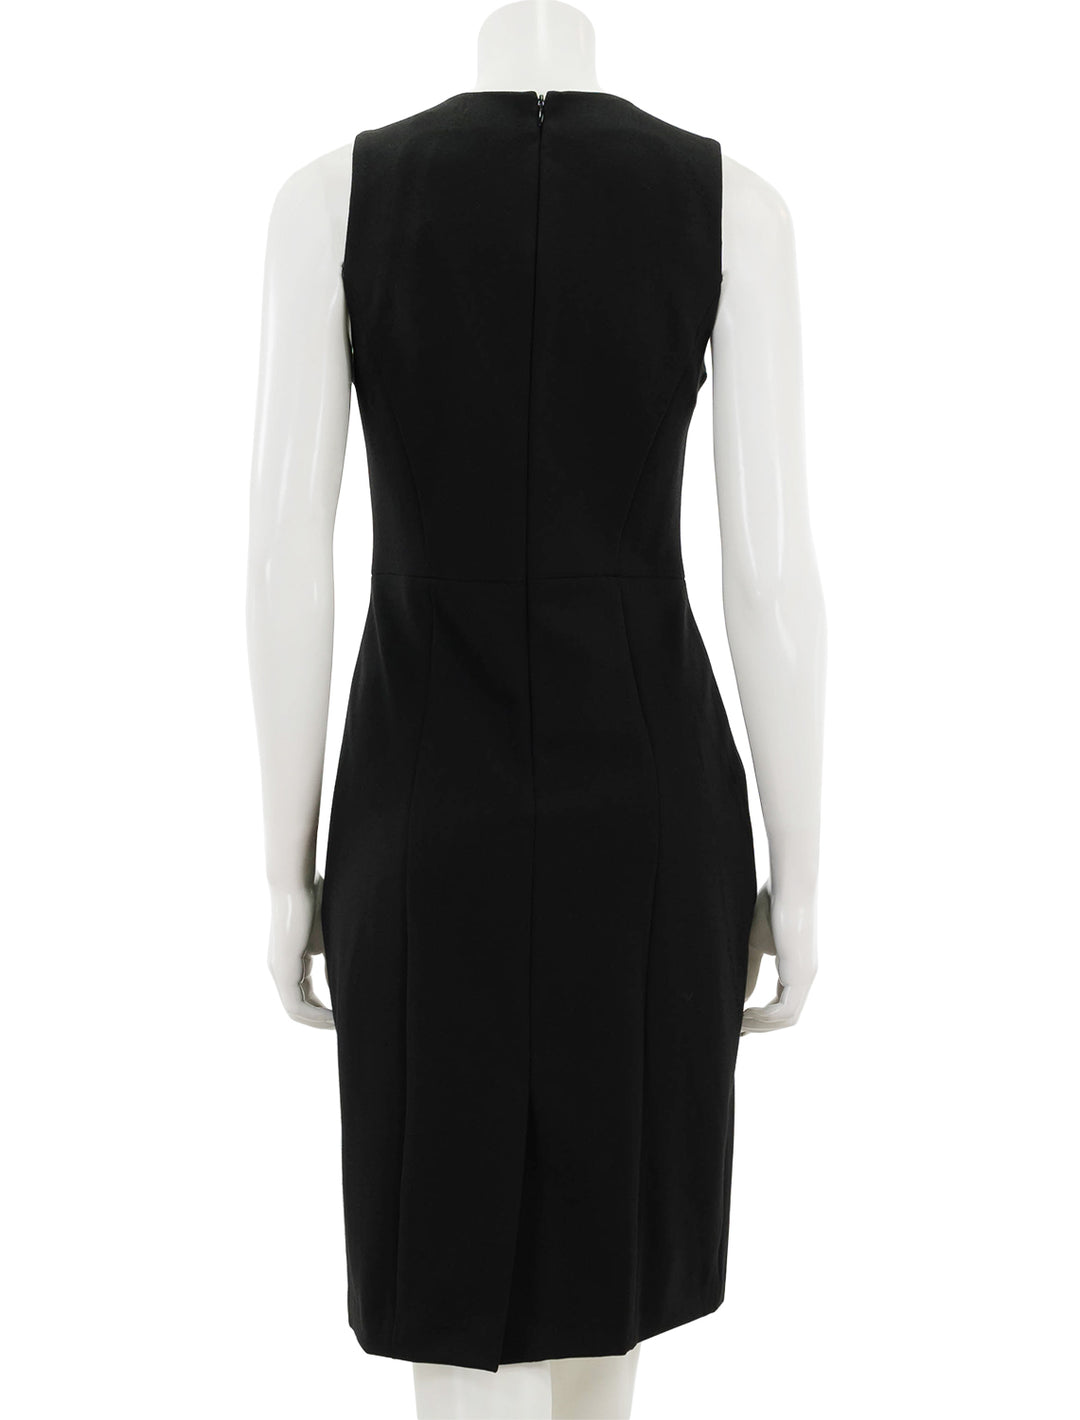 Back view of Vince's seamed front sheath dress in black.